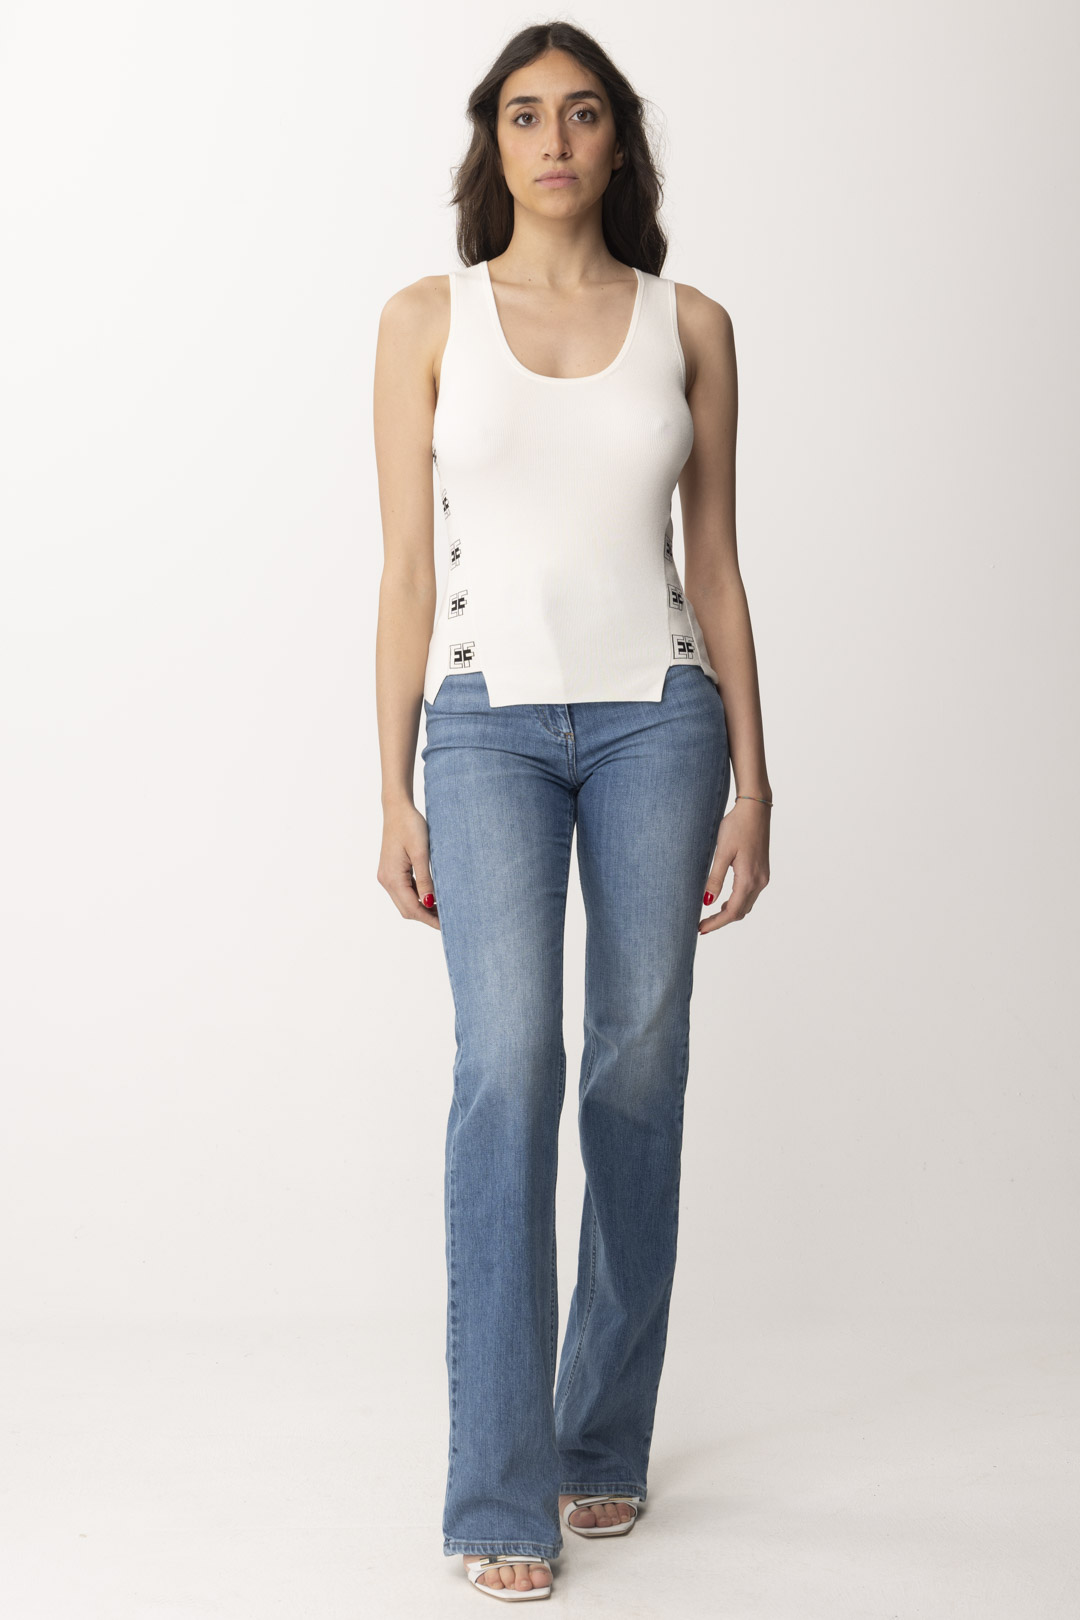 Preview: Elisabetta Franchi Knit top with branded bands Burro